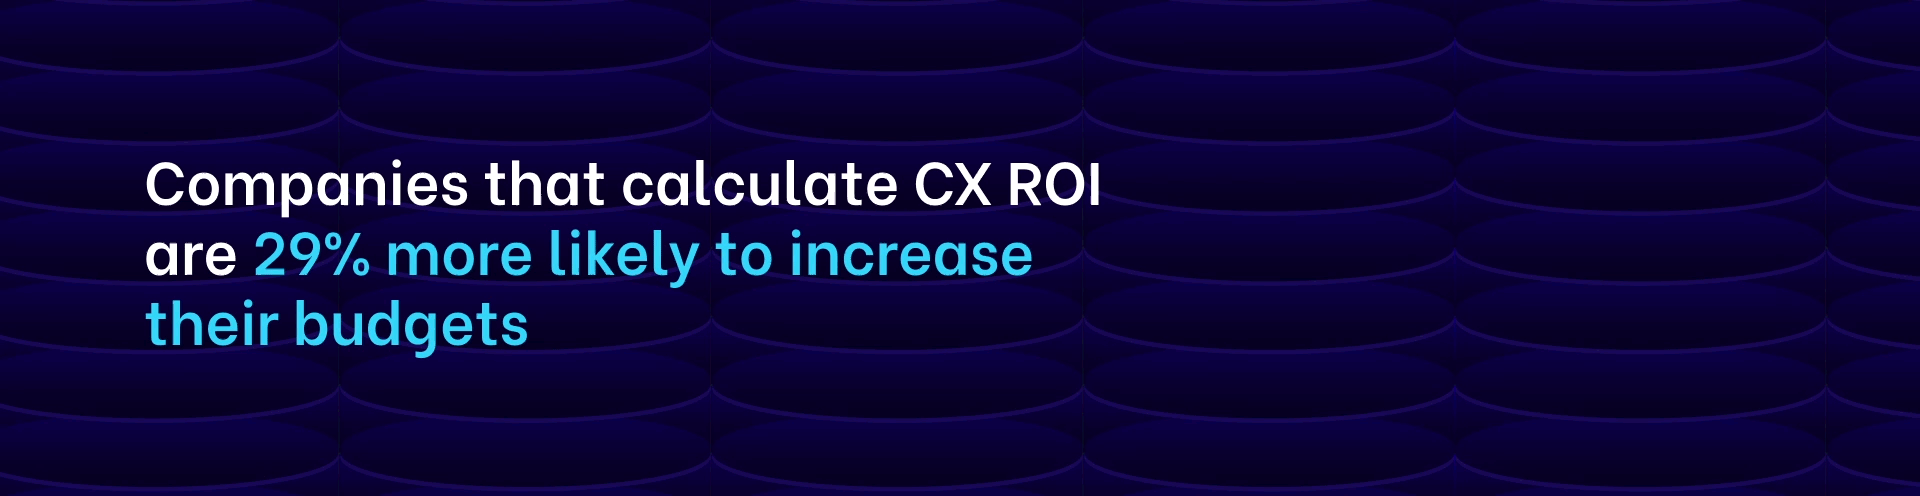 Companies that calculate CX ROI are 29% more likely to increase their budgets